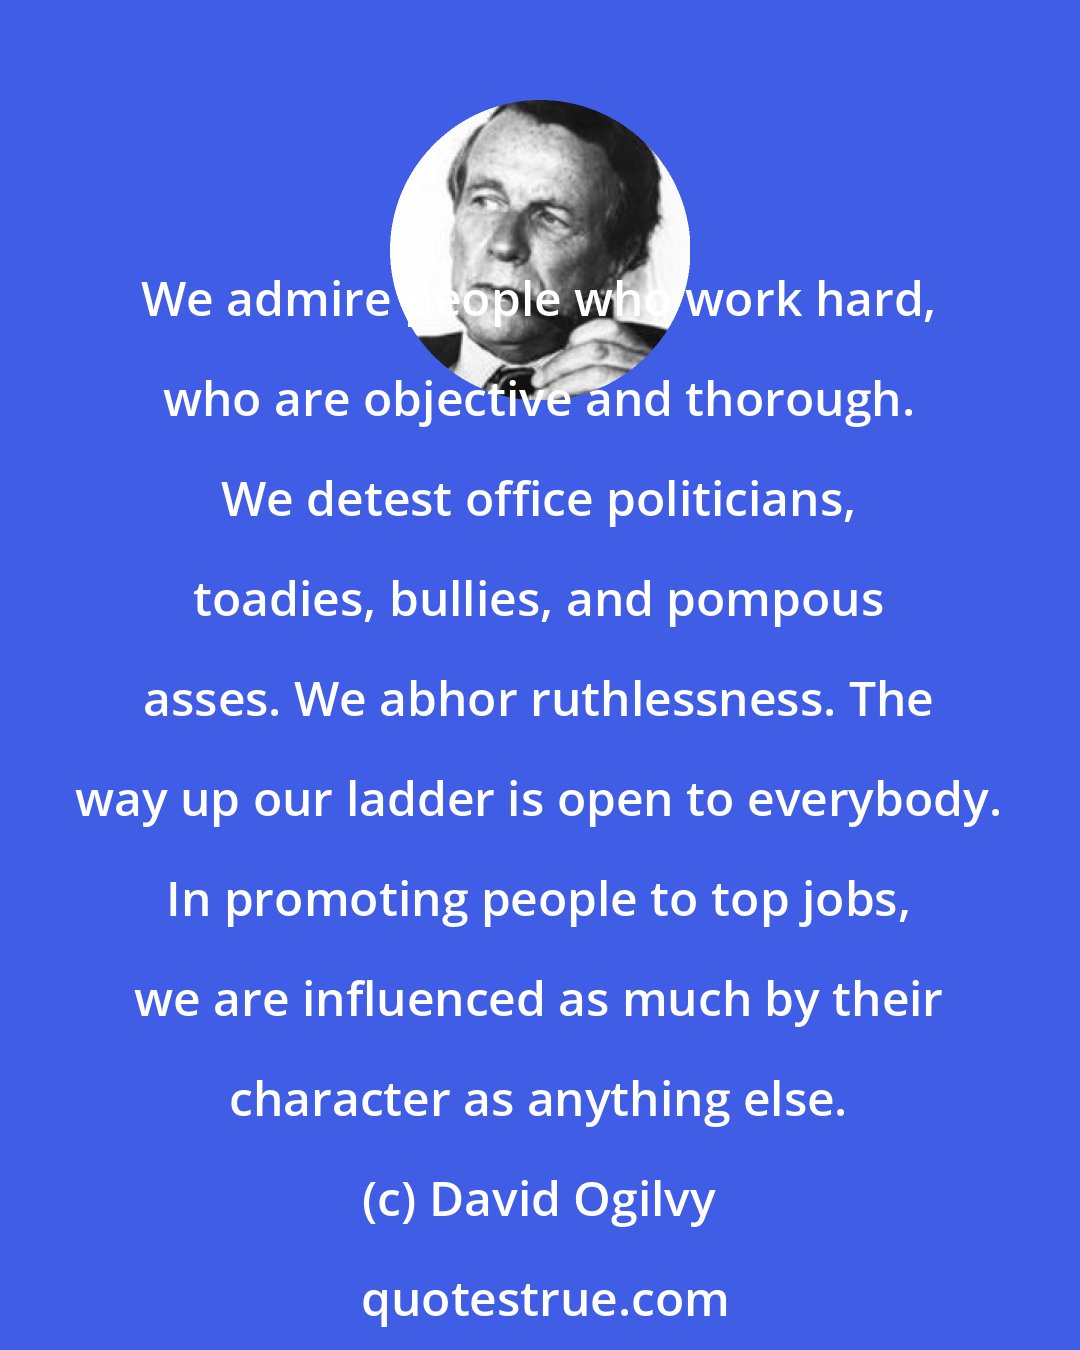 David Ogilvy: We admire people who work hard, who are objective and thorough. We detest office politicians, toadies, bullies, and pompous asses. We abhor ruthlessness. The way up our ladder is open to everybody. In promoting people to top jobs, we are influenced as much by their character as anything else.